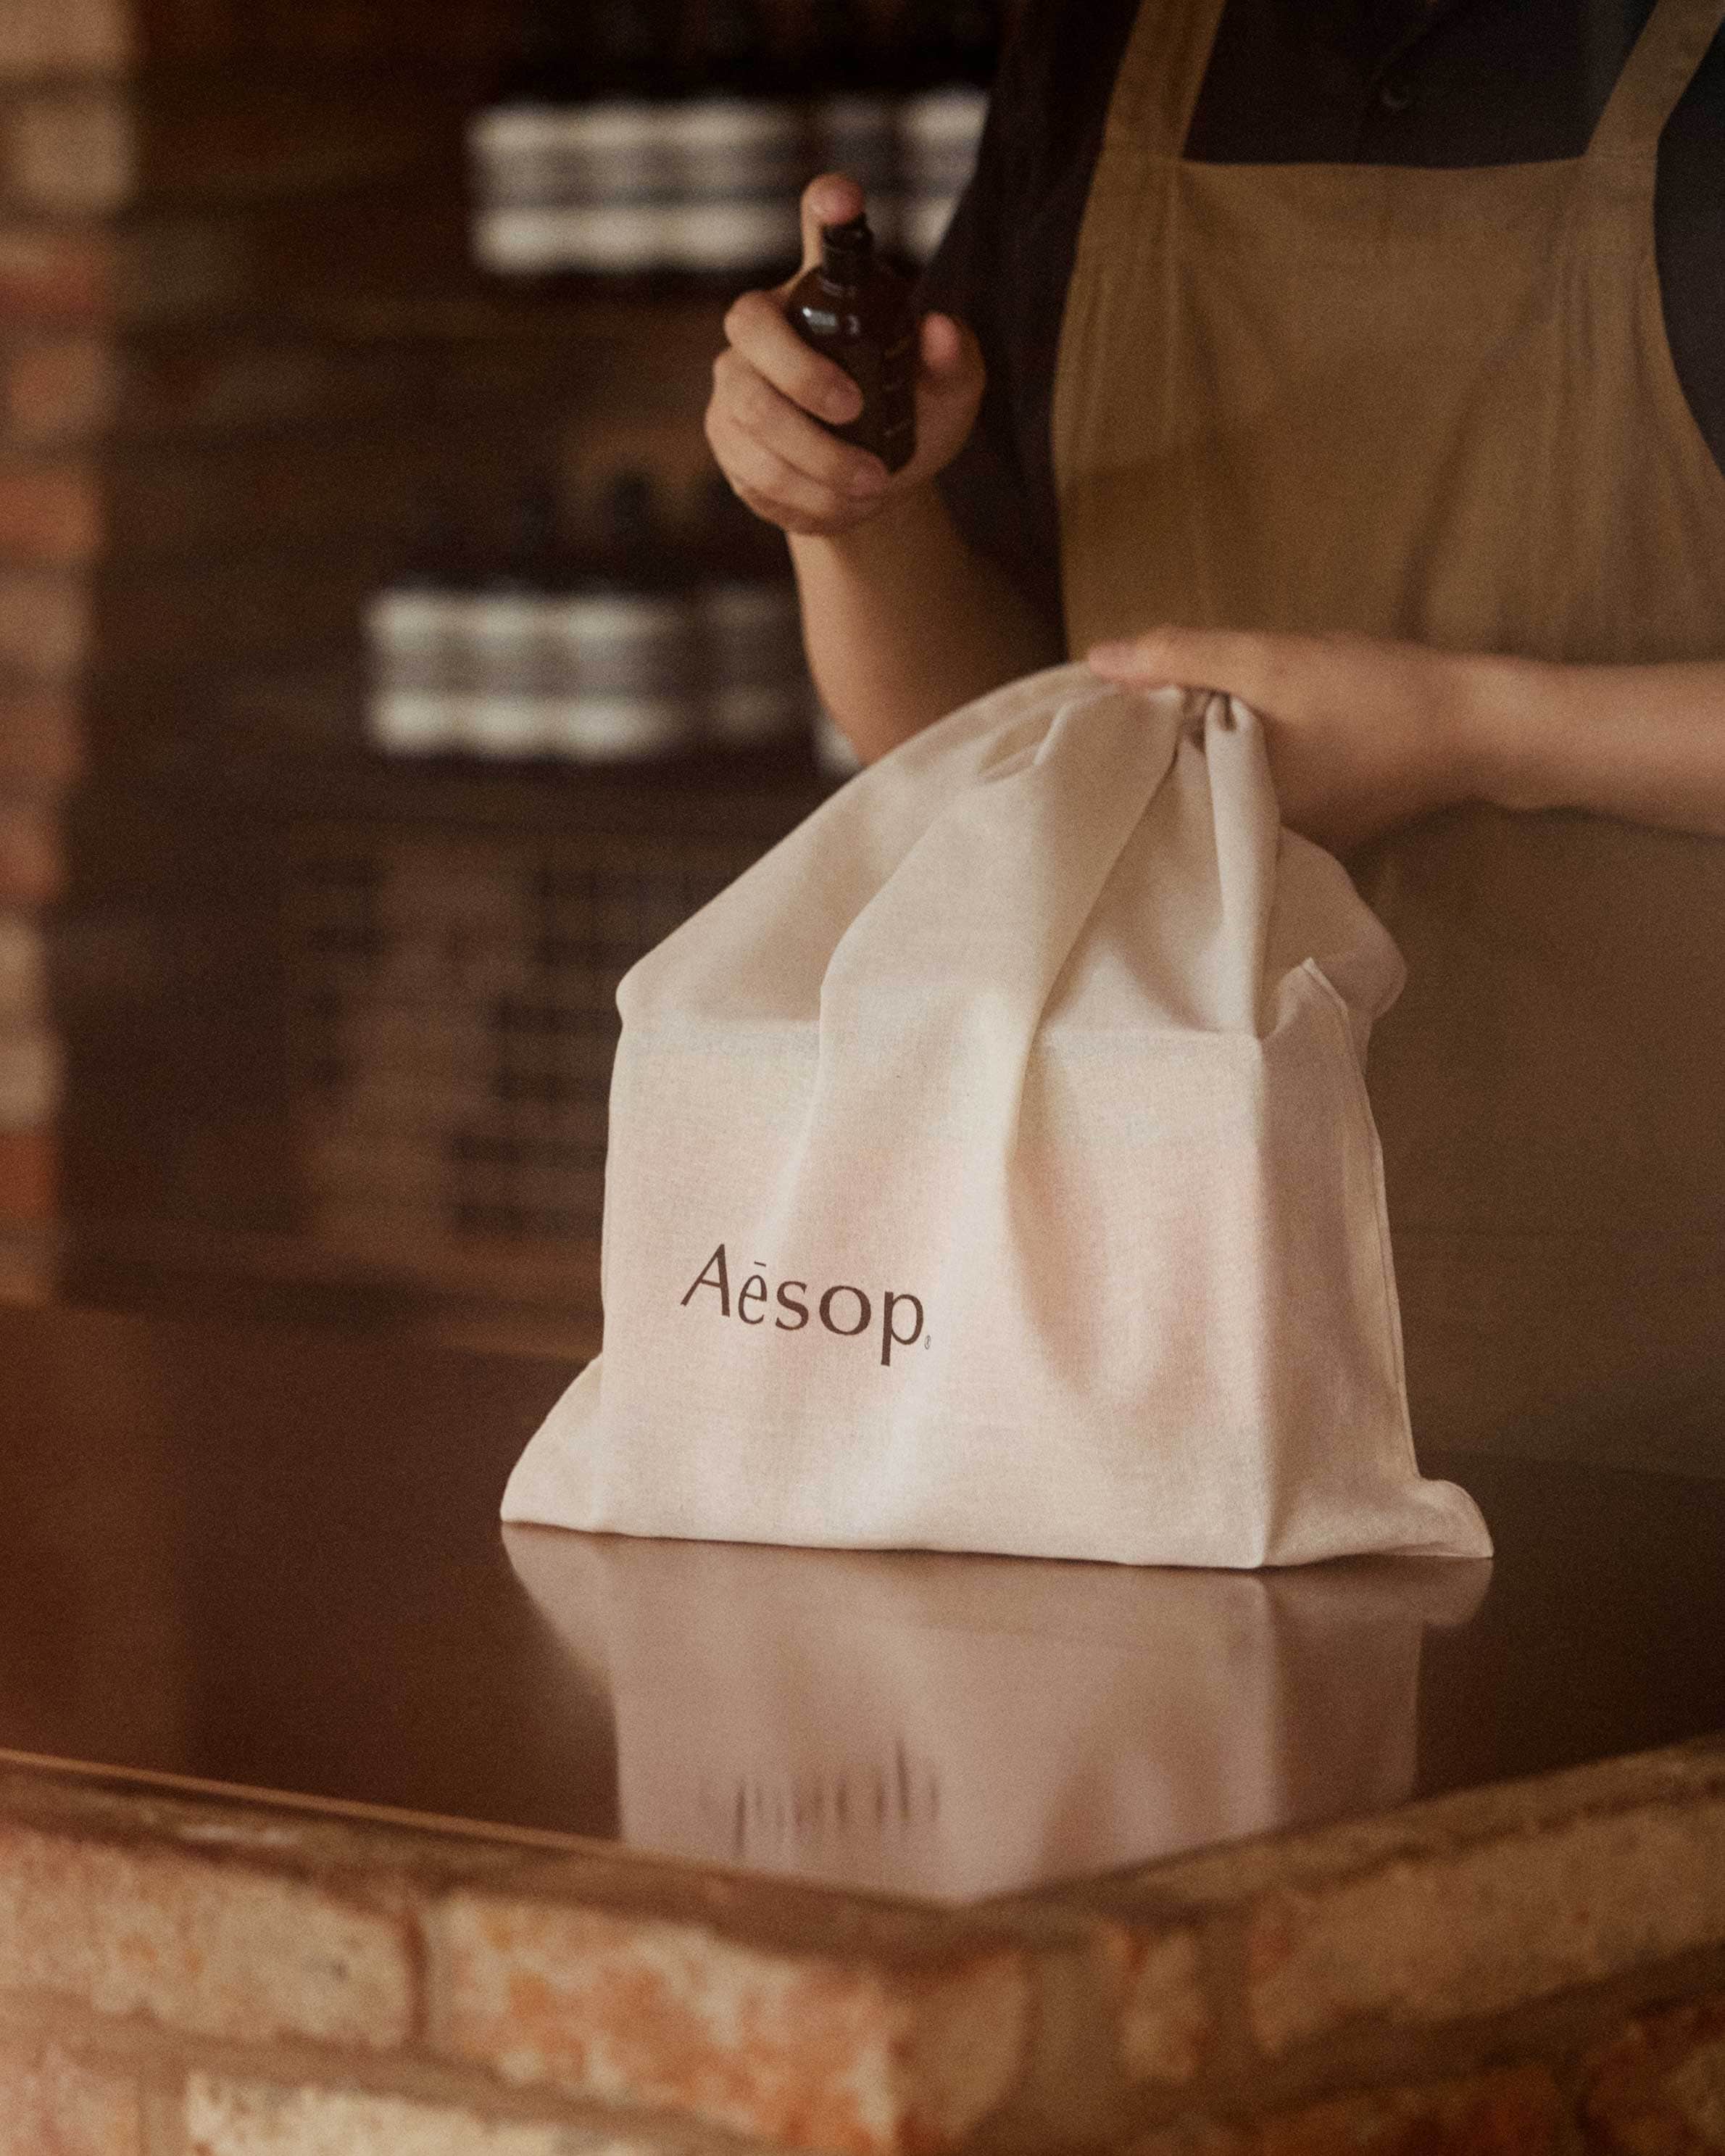 Aesop consultant spraying Aesop fragrance on a cotton bag